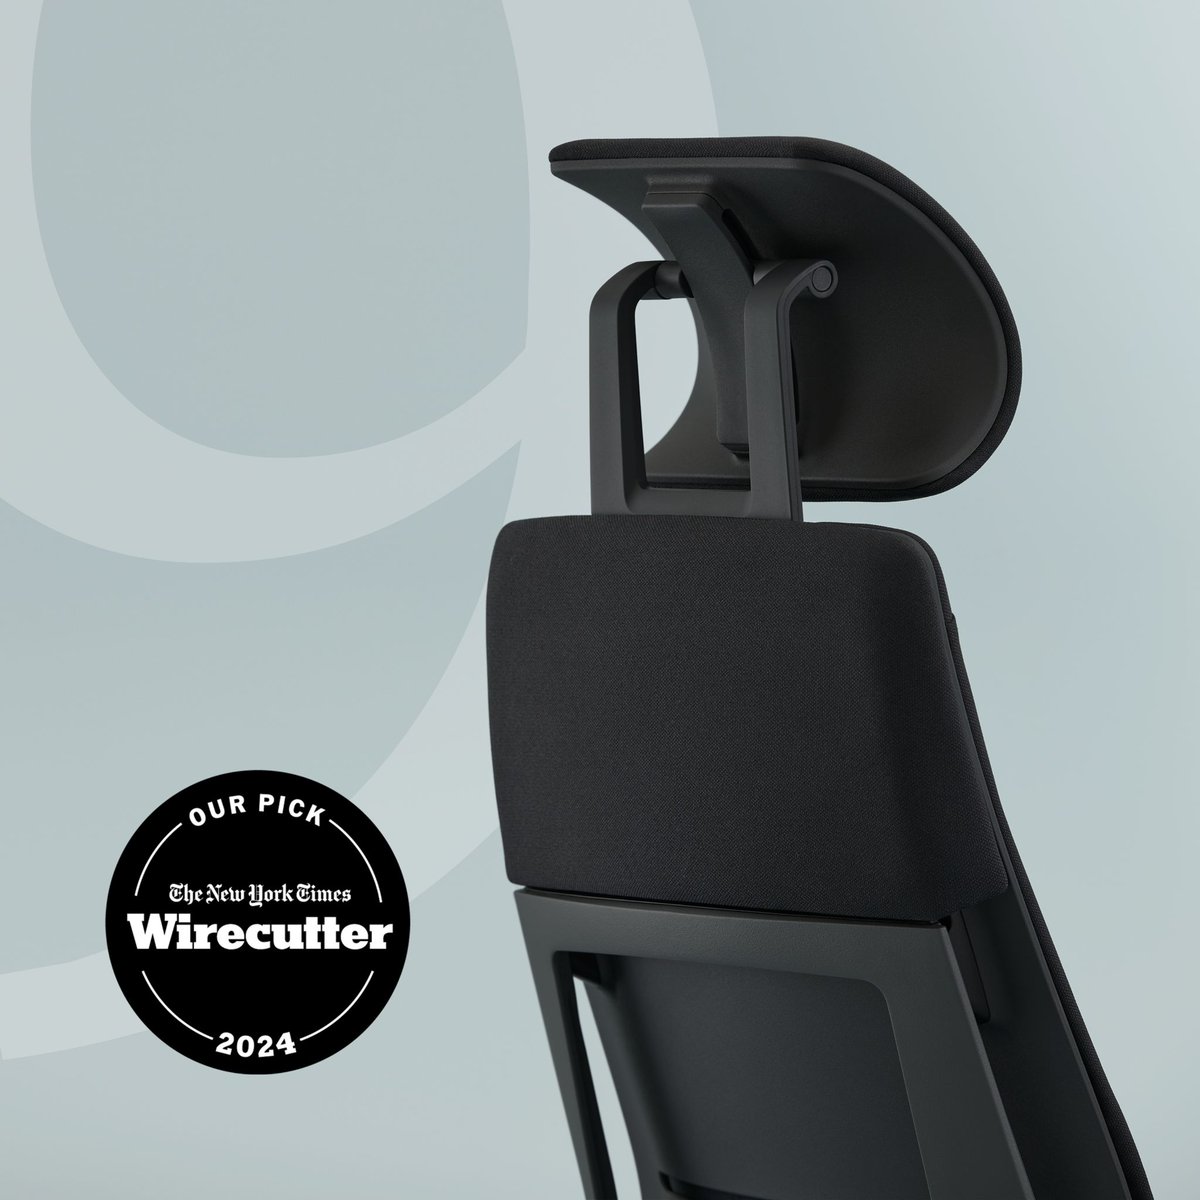 For the ninth year in a row, Steelcase Gesture has been selected as New York Times Wirecutter's Best Office Chair pick. If the third time is the charm, what do you call the ninth time?  Shop Gesture now: bit.ly/3TwRWsq #officechair #bestofficechair